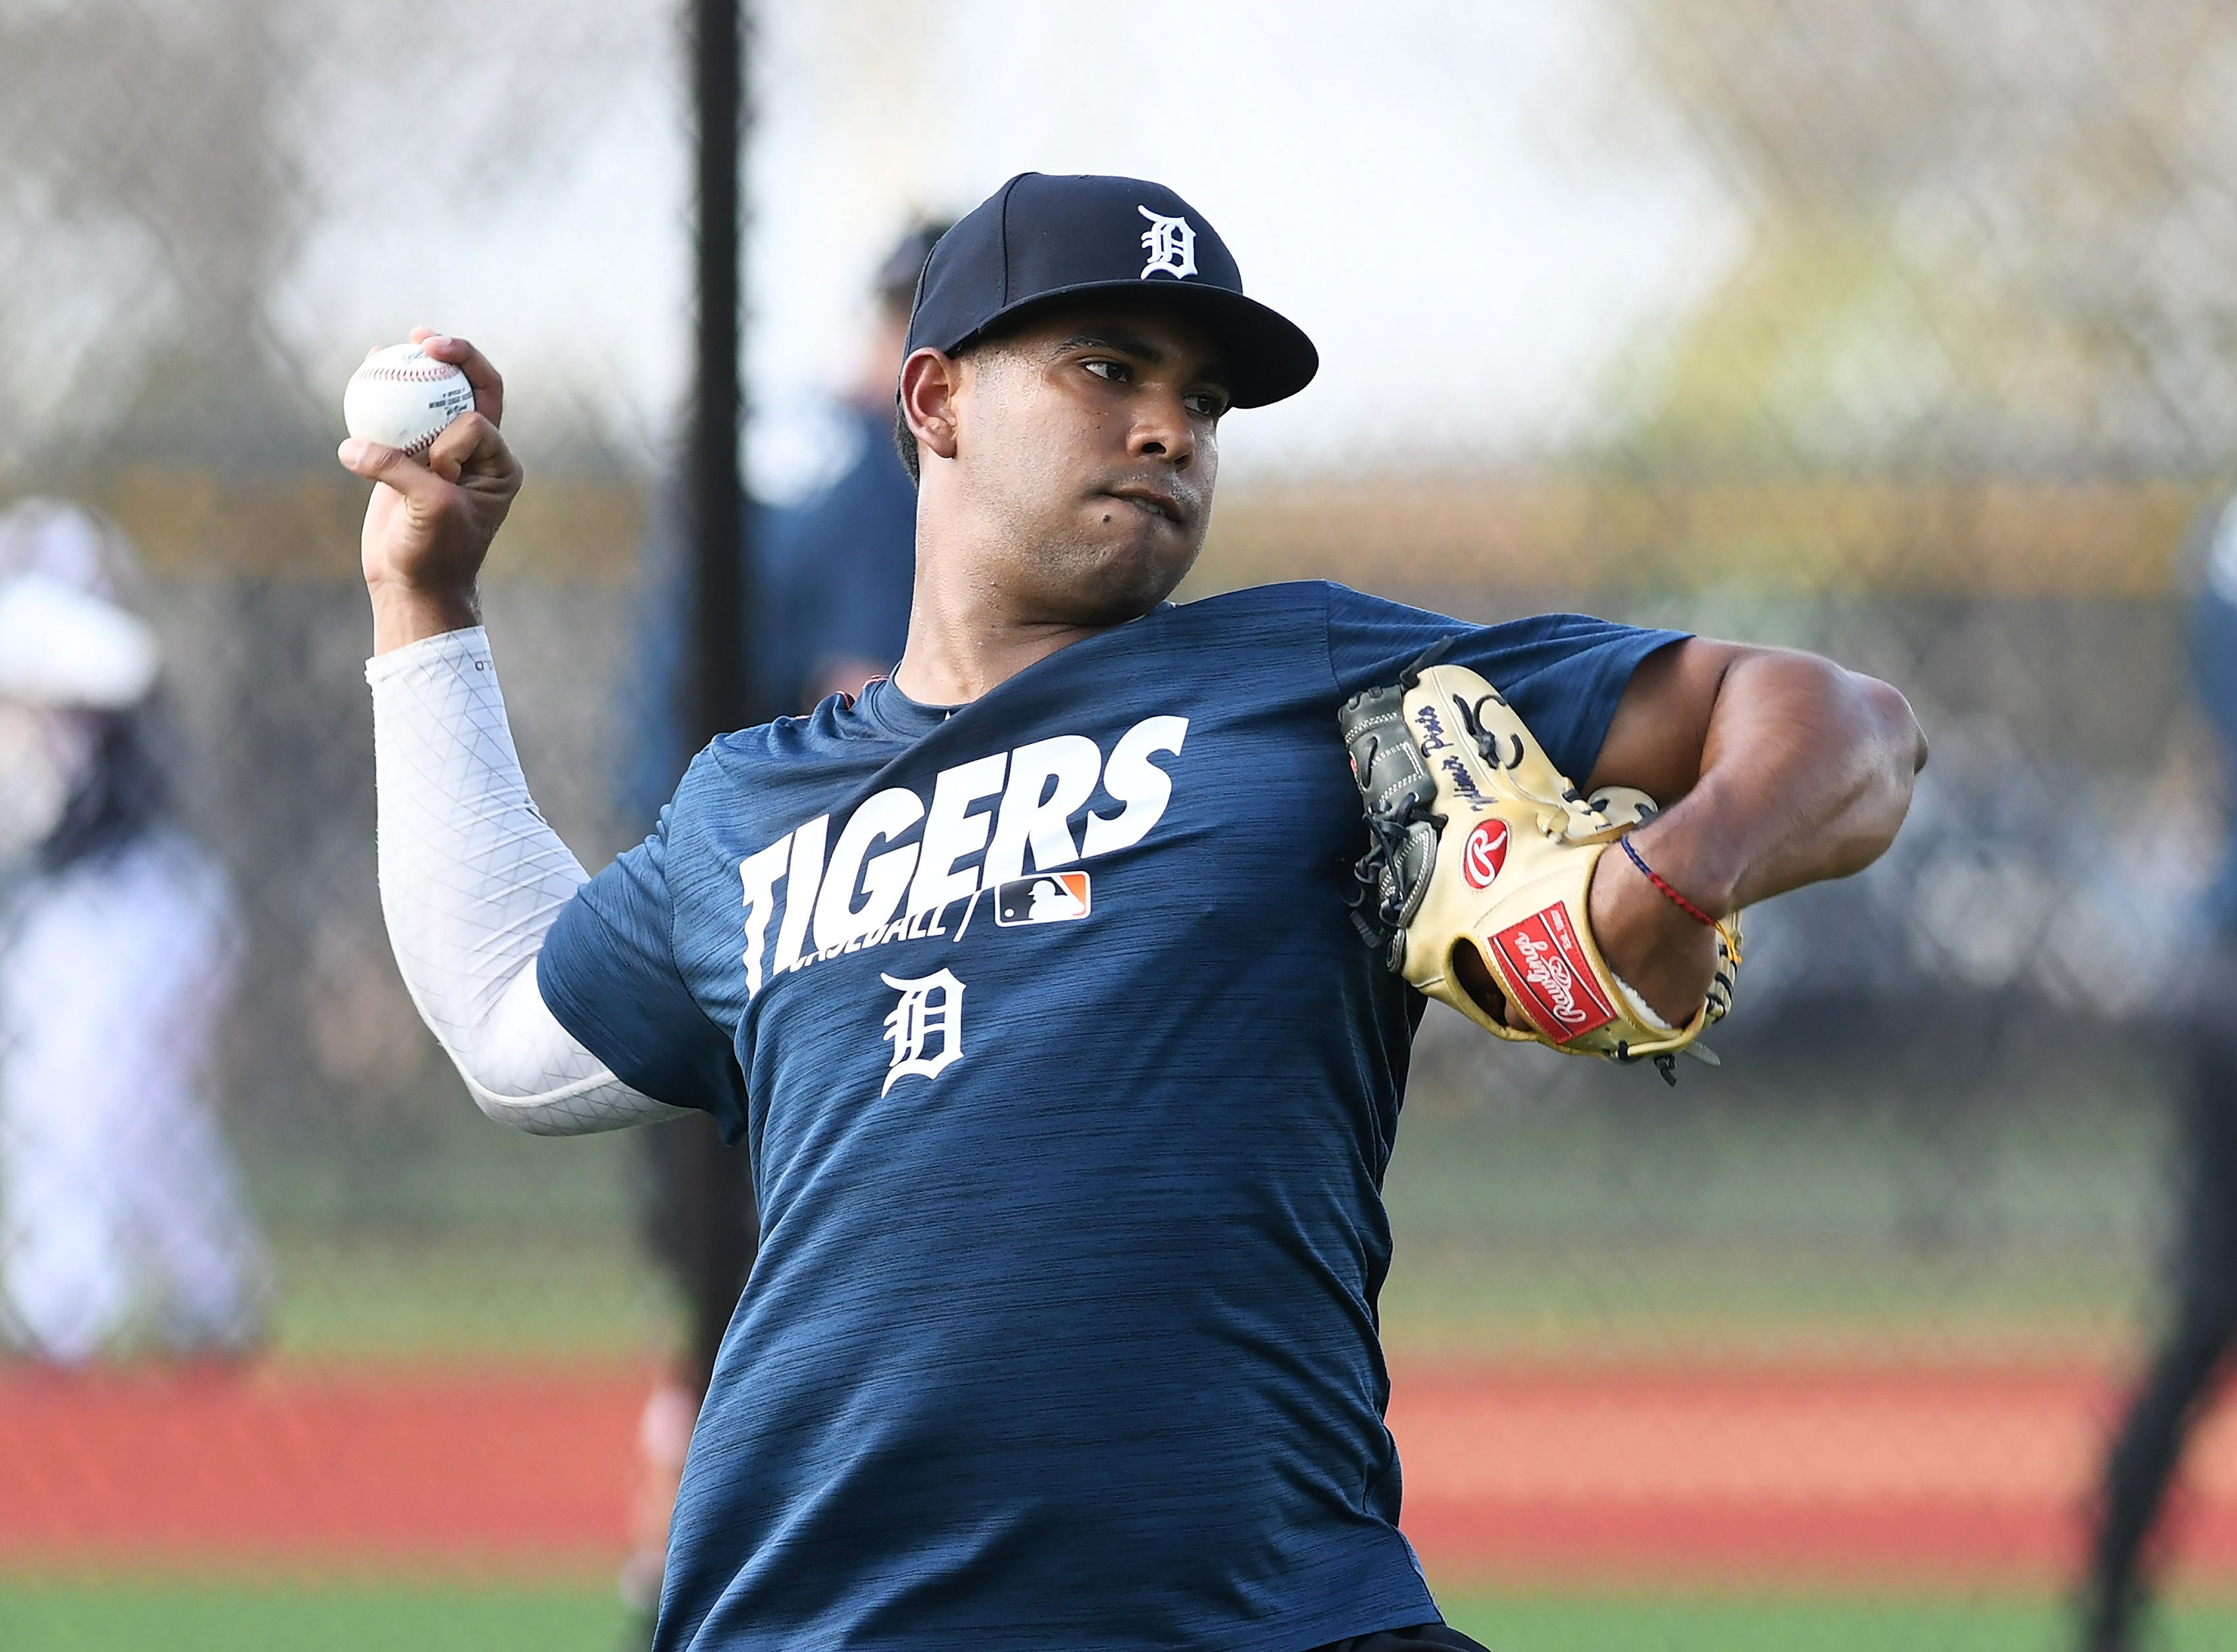 13. Wladimir Pinto, 21, 5-11, 170, RH reliever: Chomp onto those strikeout numbers from 2019 (87 in 61.2 innings between Lakeland and Erie) and you get a sense for Pinto’s high-voltage arm and fastball. Needs to throw more strikes, for sure (31 unintentional walks in 2019), which will hint at how rapidly this Venezuelan can ponder a ticket to Detroit.